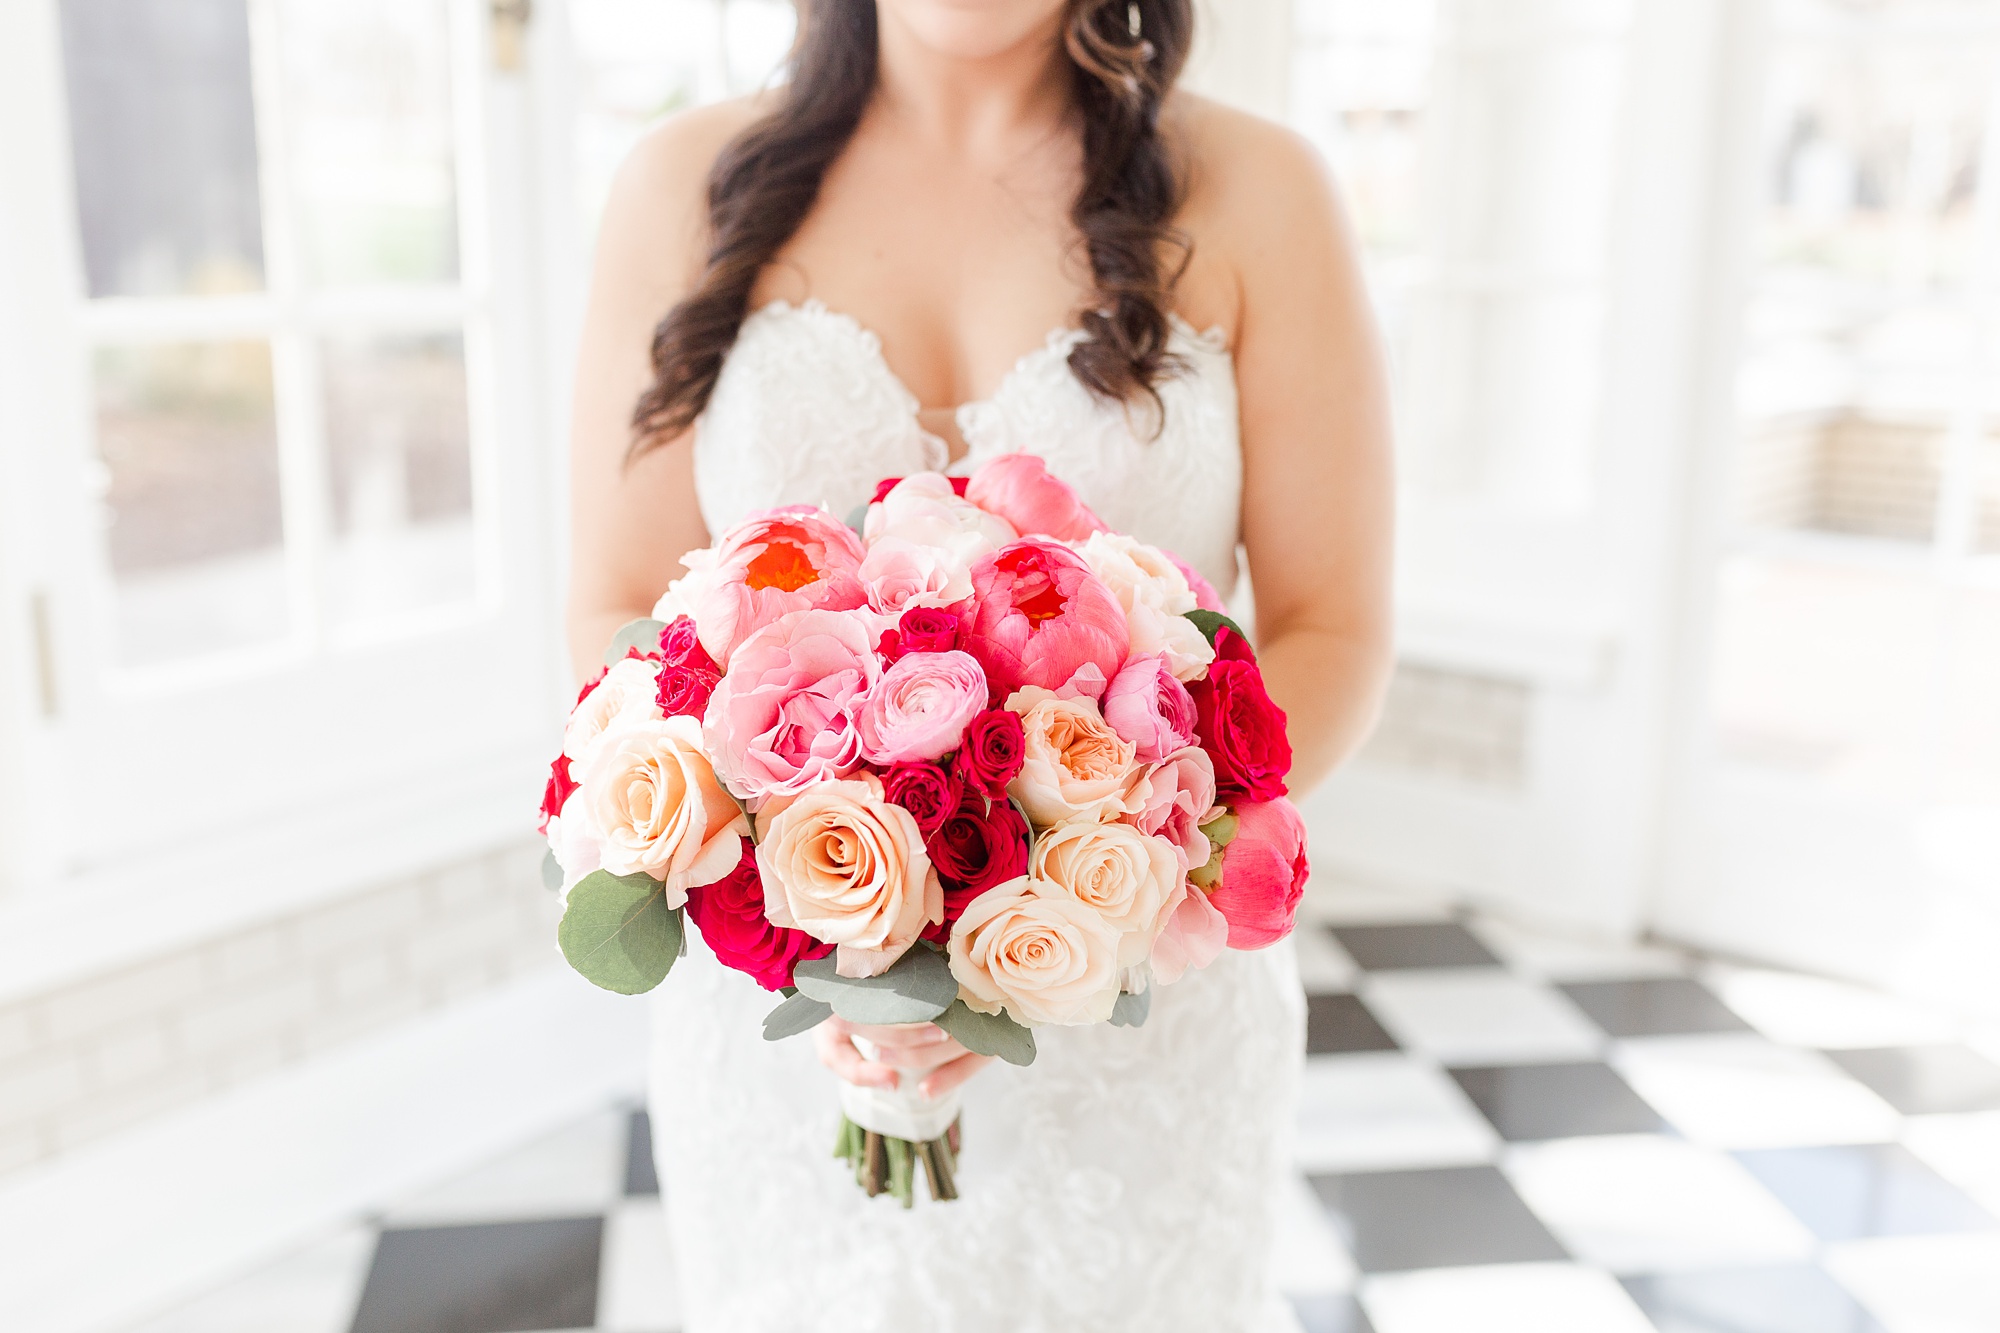 Classic Separk Mansion wedding photographed by Kevyn Dixon Photography